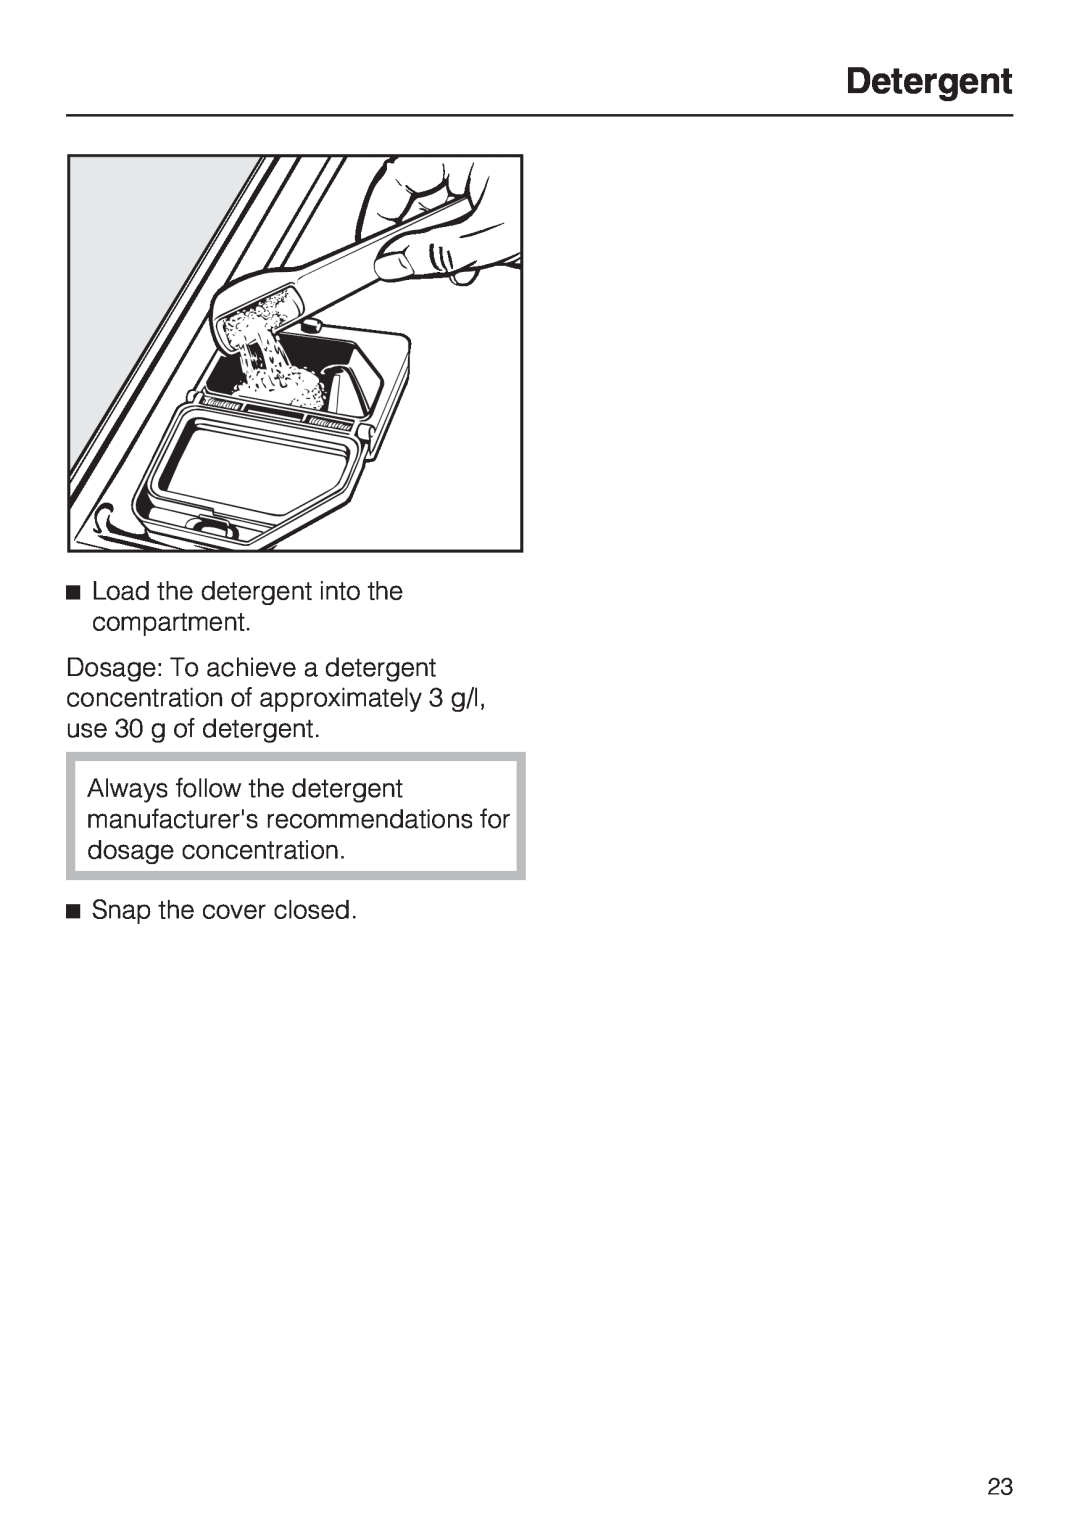 Miele G 7883 CD installation instructions Detergent, Load the detergent into the compartment, Snap the cover closed 